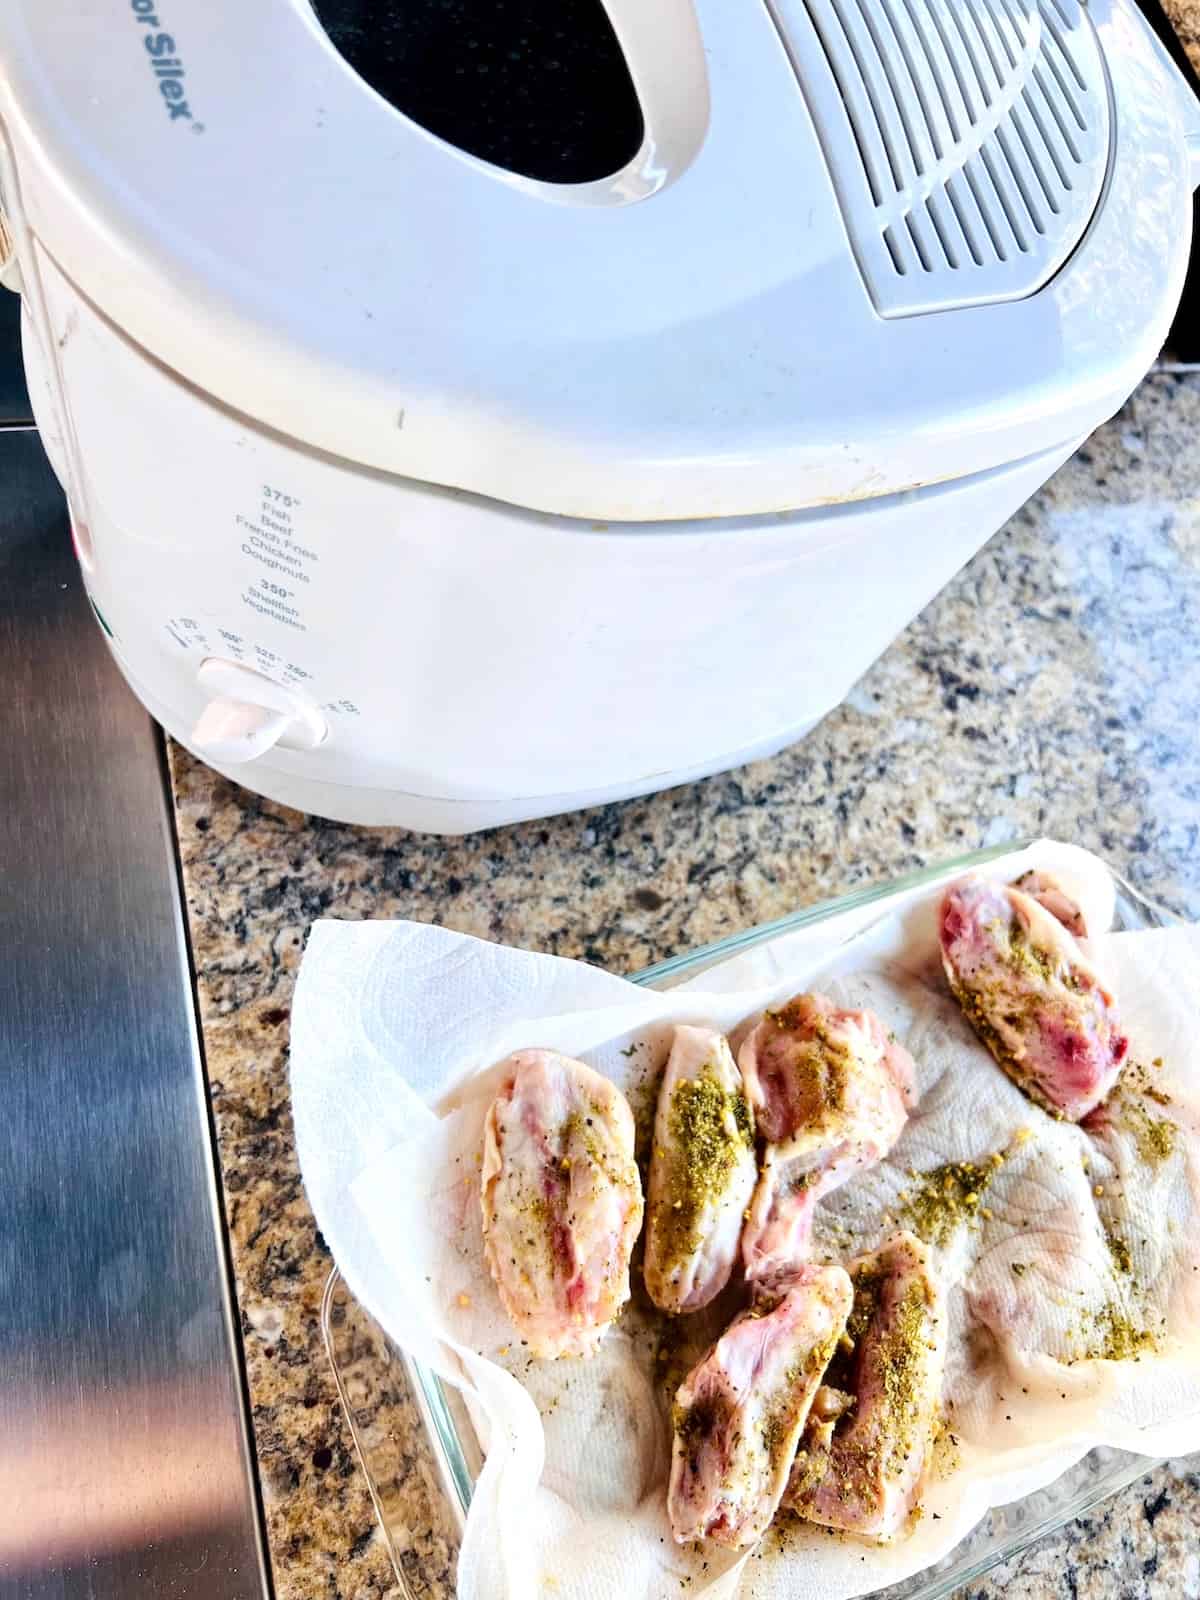 Dish with raw wings next to the deep fryer.